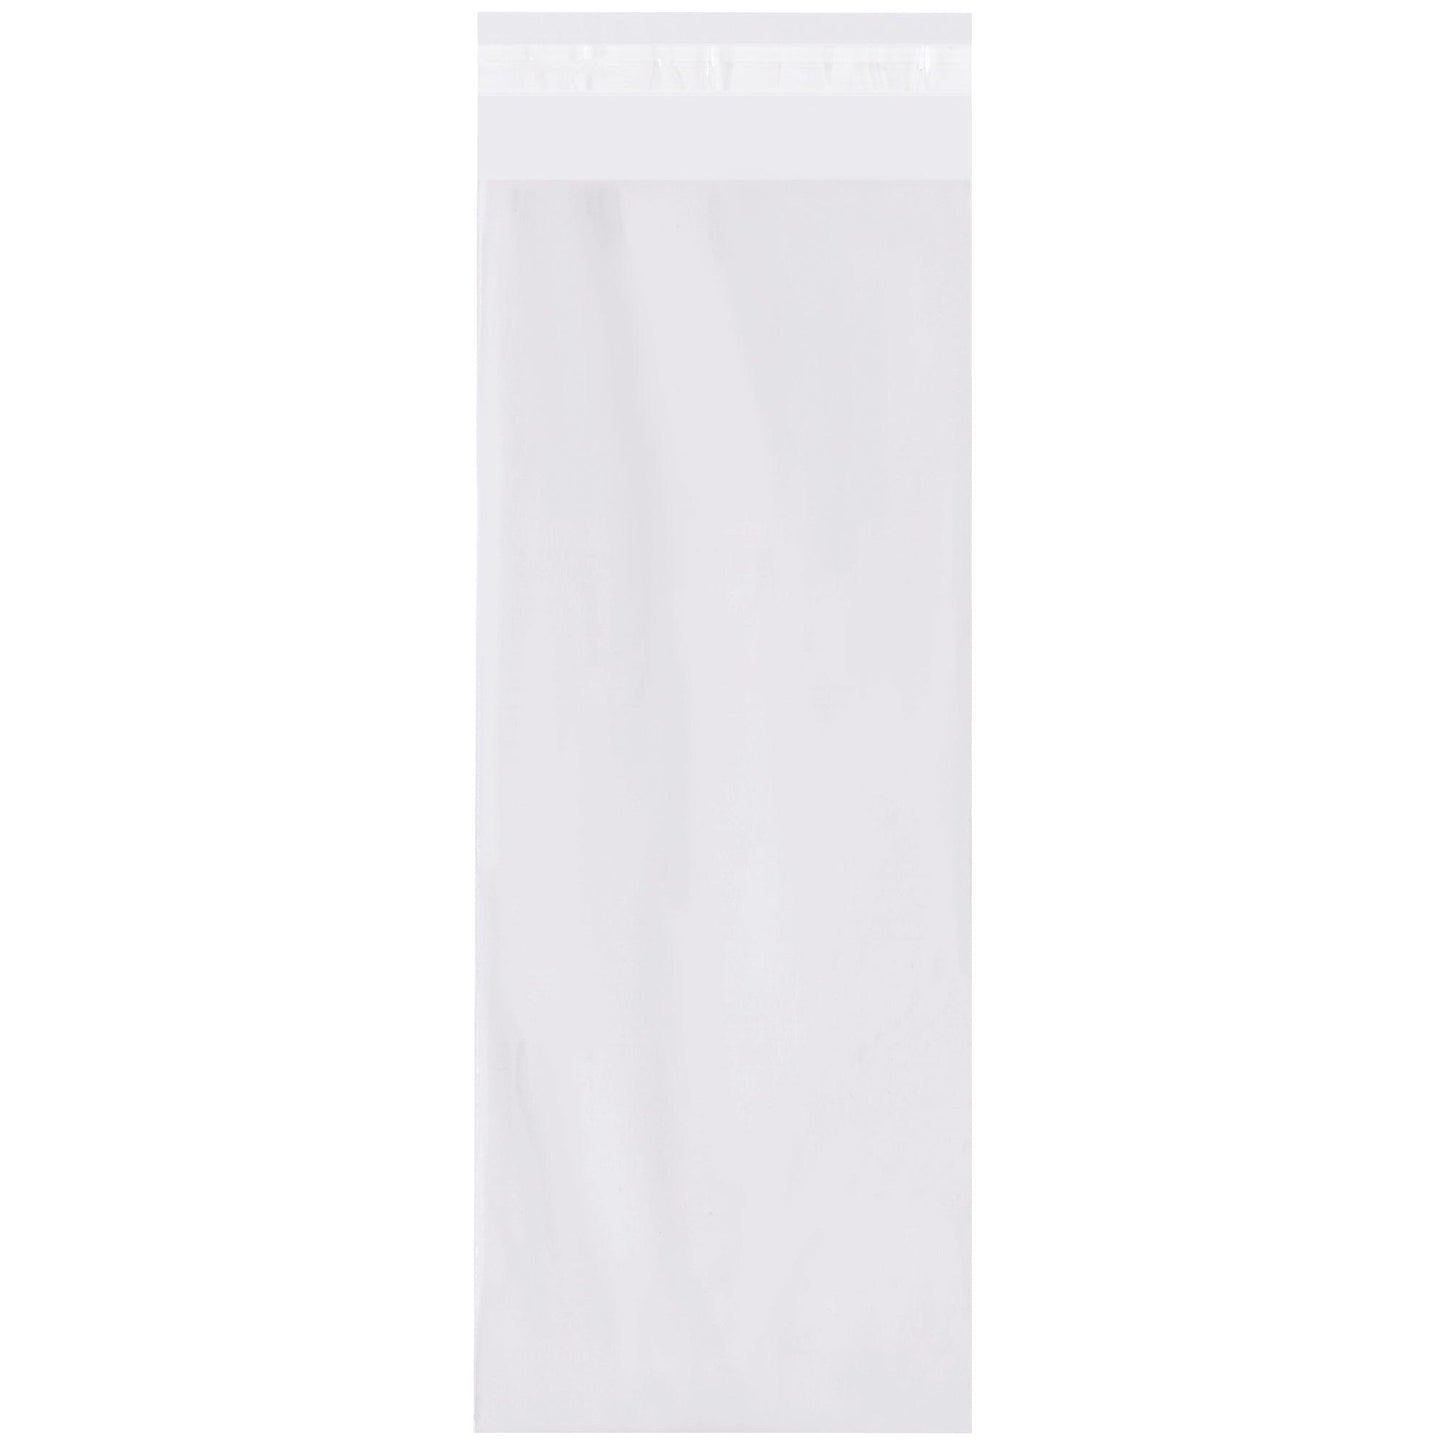 4 x 10" - 1.5 Mil Resealable Poly Bags - PRR041015